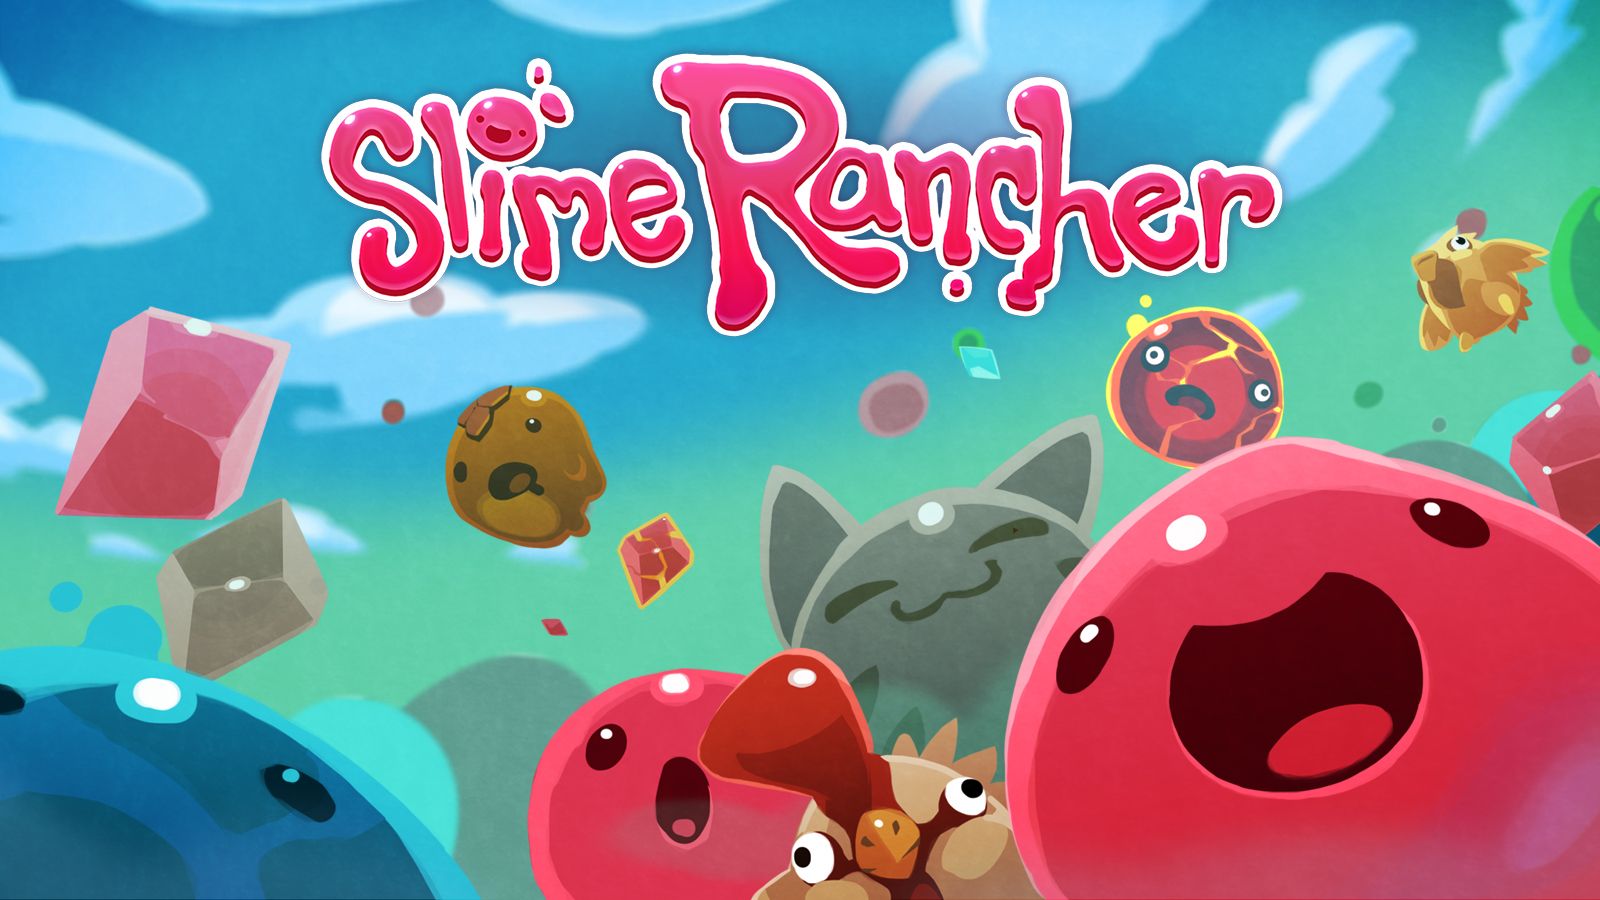 Slime Rancher is free at Epic Games Store for 2 weeks